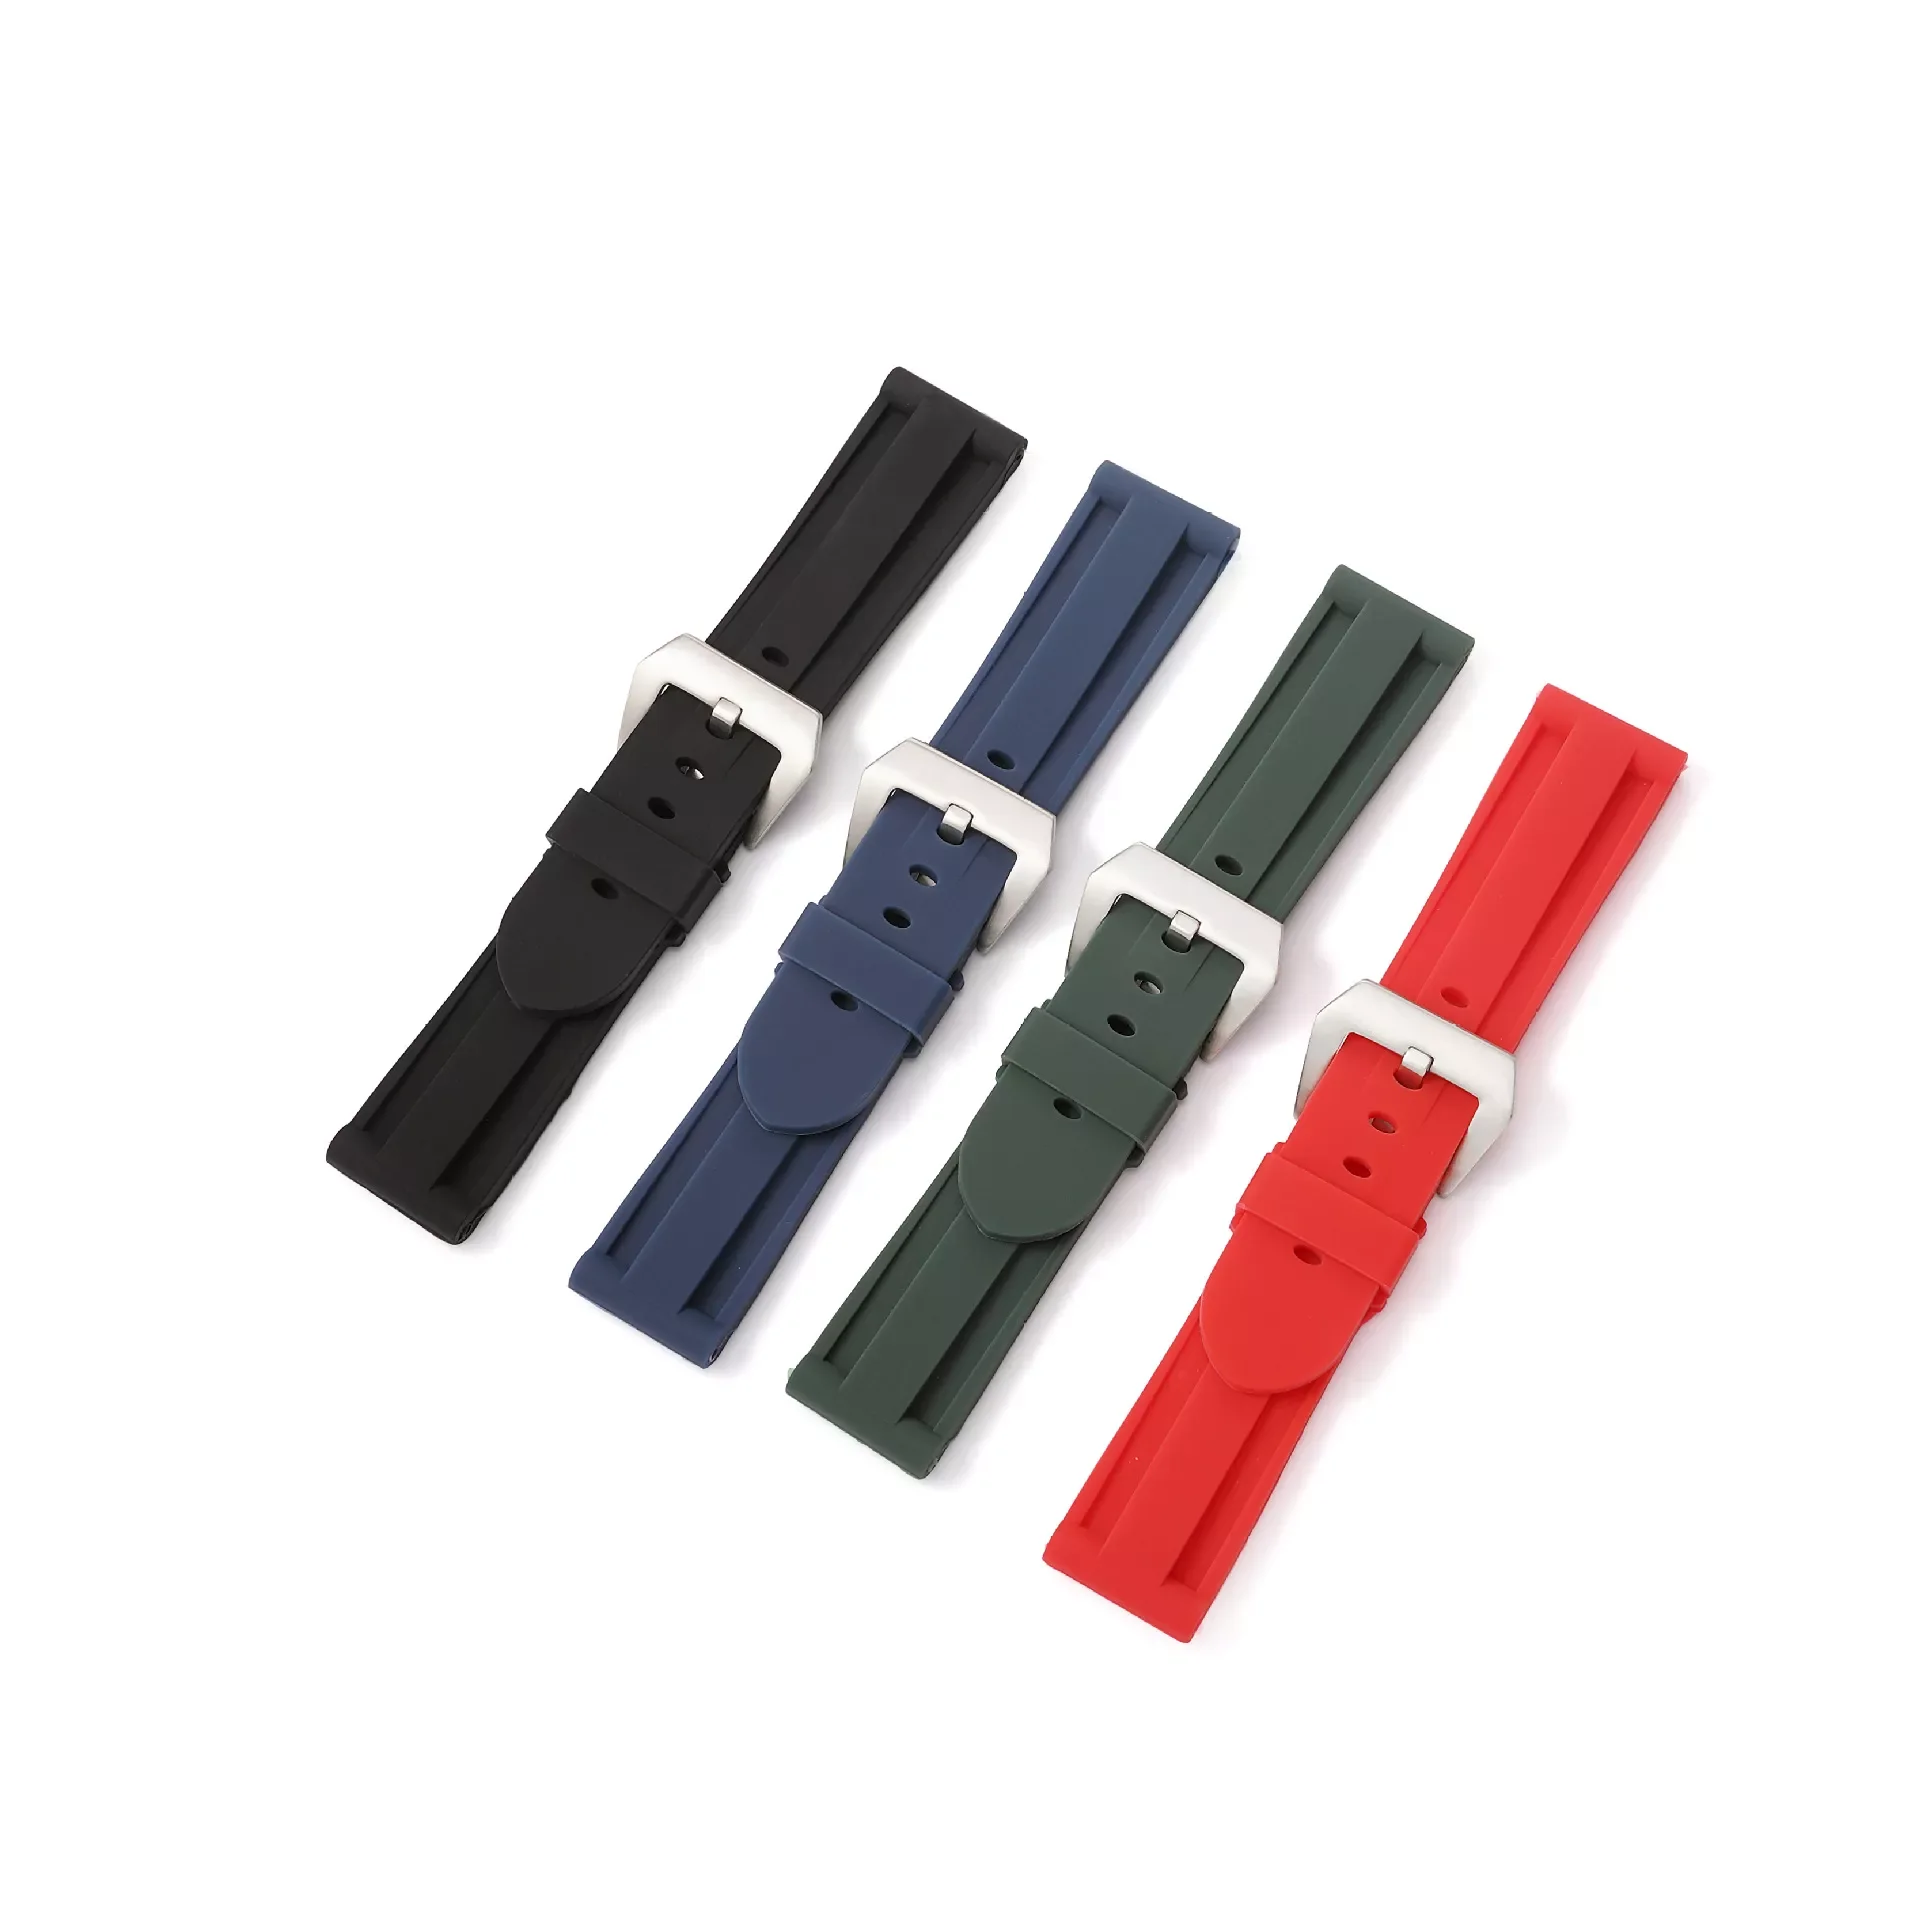 

22mm 24mm 26mm High Quality Rubber Watchband For Panerai Watch Band Waterproof Strap Free Tools UTHAI Z39